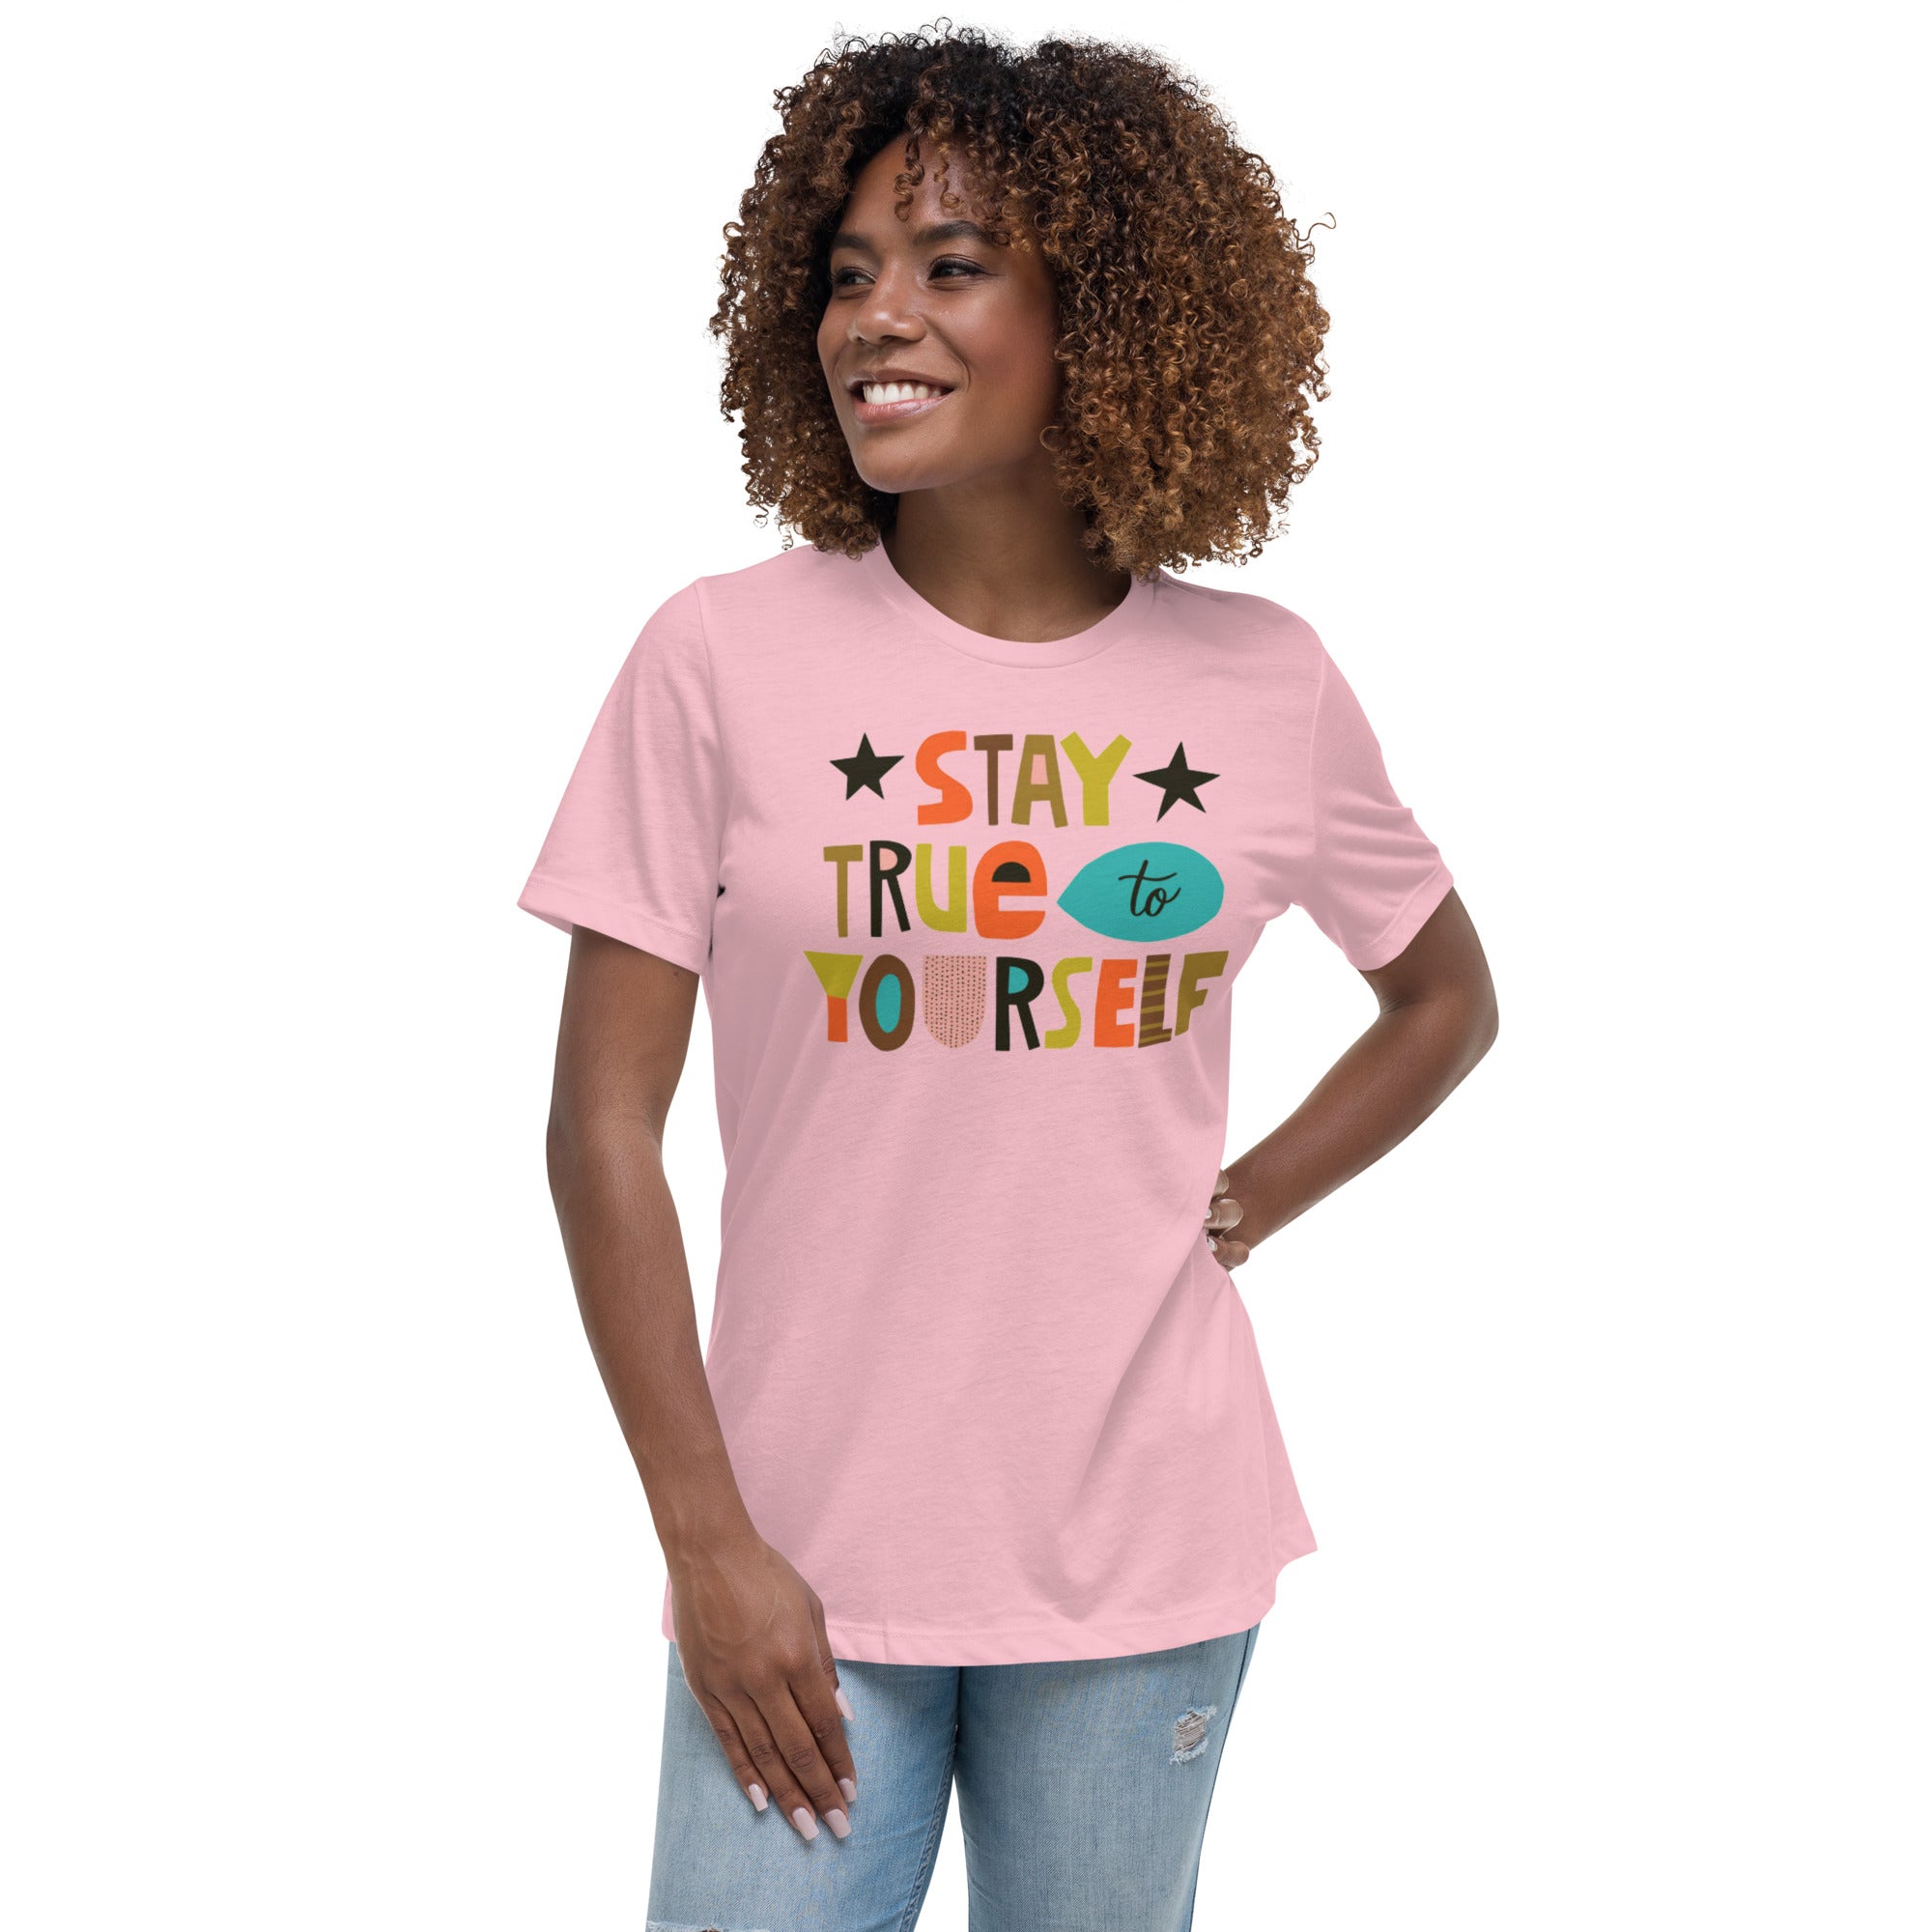 Stay True To Yourself Women's Relaxed T-Shirt